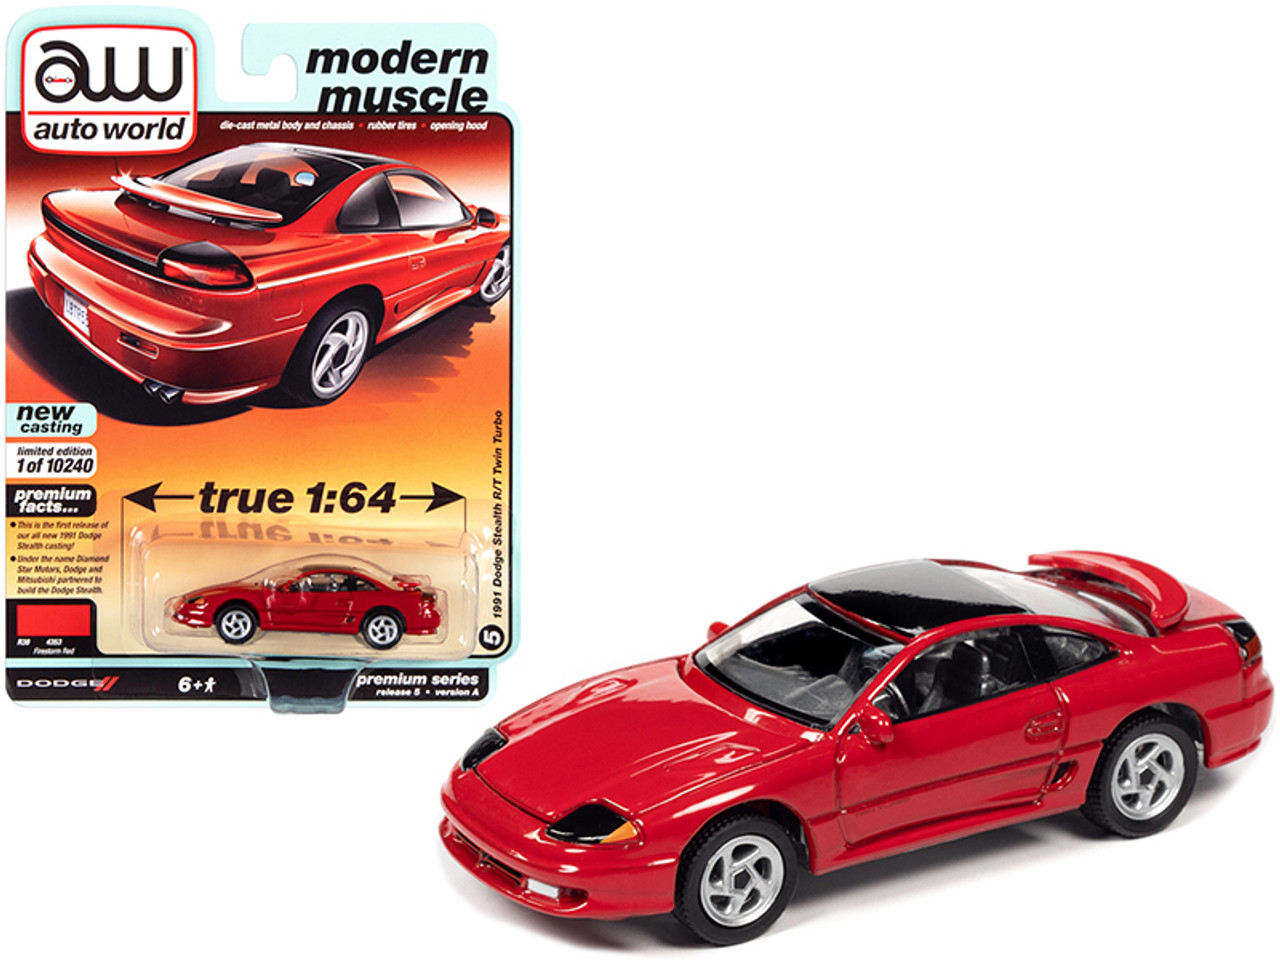 1991 Dodge Stealth R/T Twin Turbo Firestorm Red with Black Top "Modern Muscle" Limited Edition to 10240 pieces Worldwide 1/64 Diecast Model Car by Autoworld